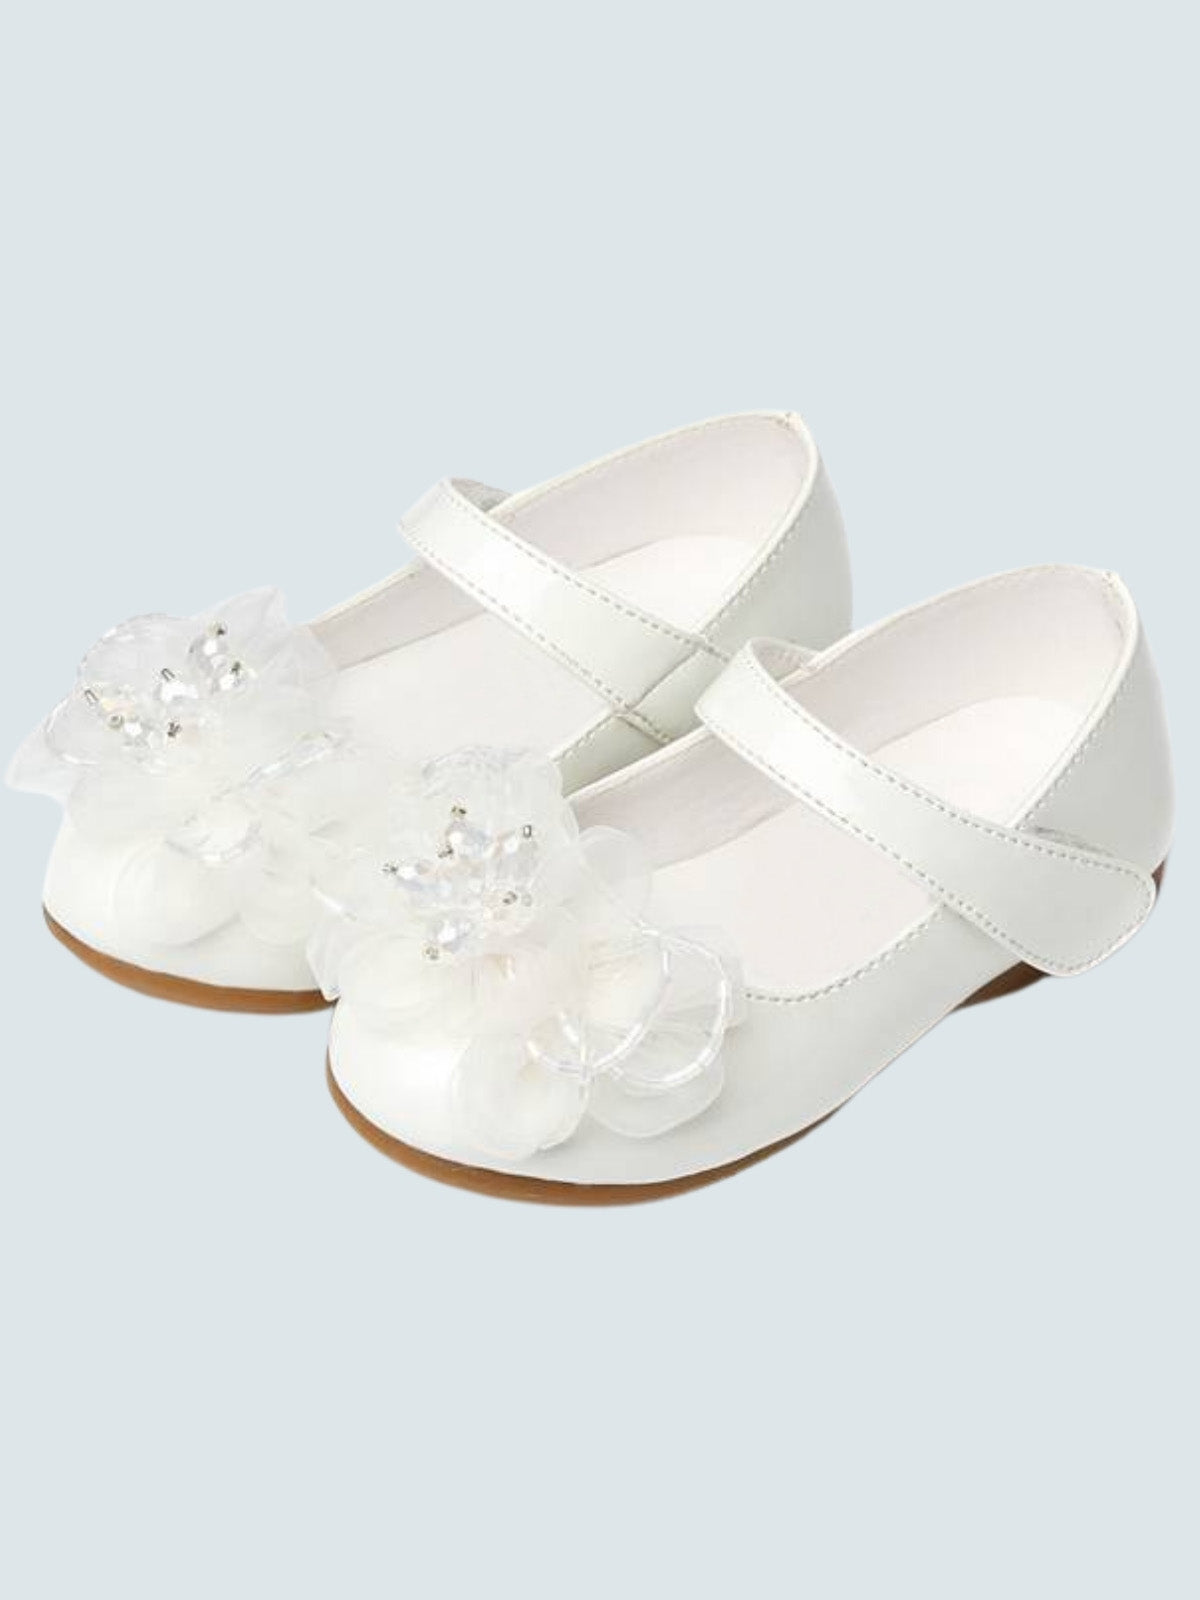 Girls Little Flower Vegan Patent Leather Flats By Liv and Mia